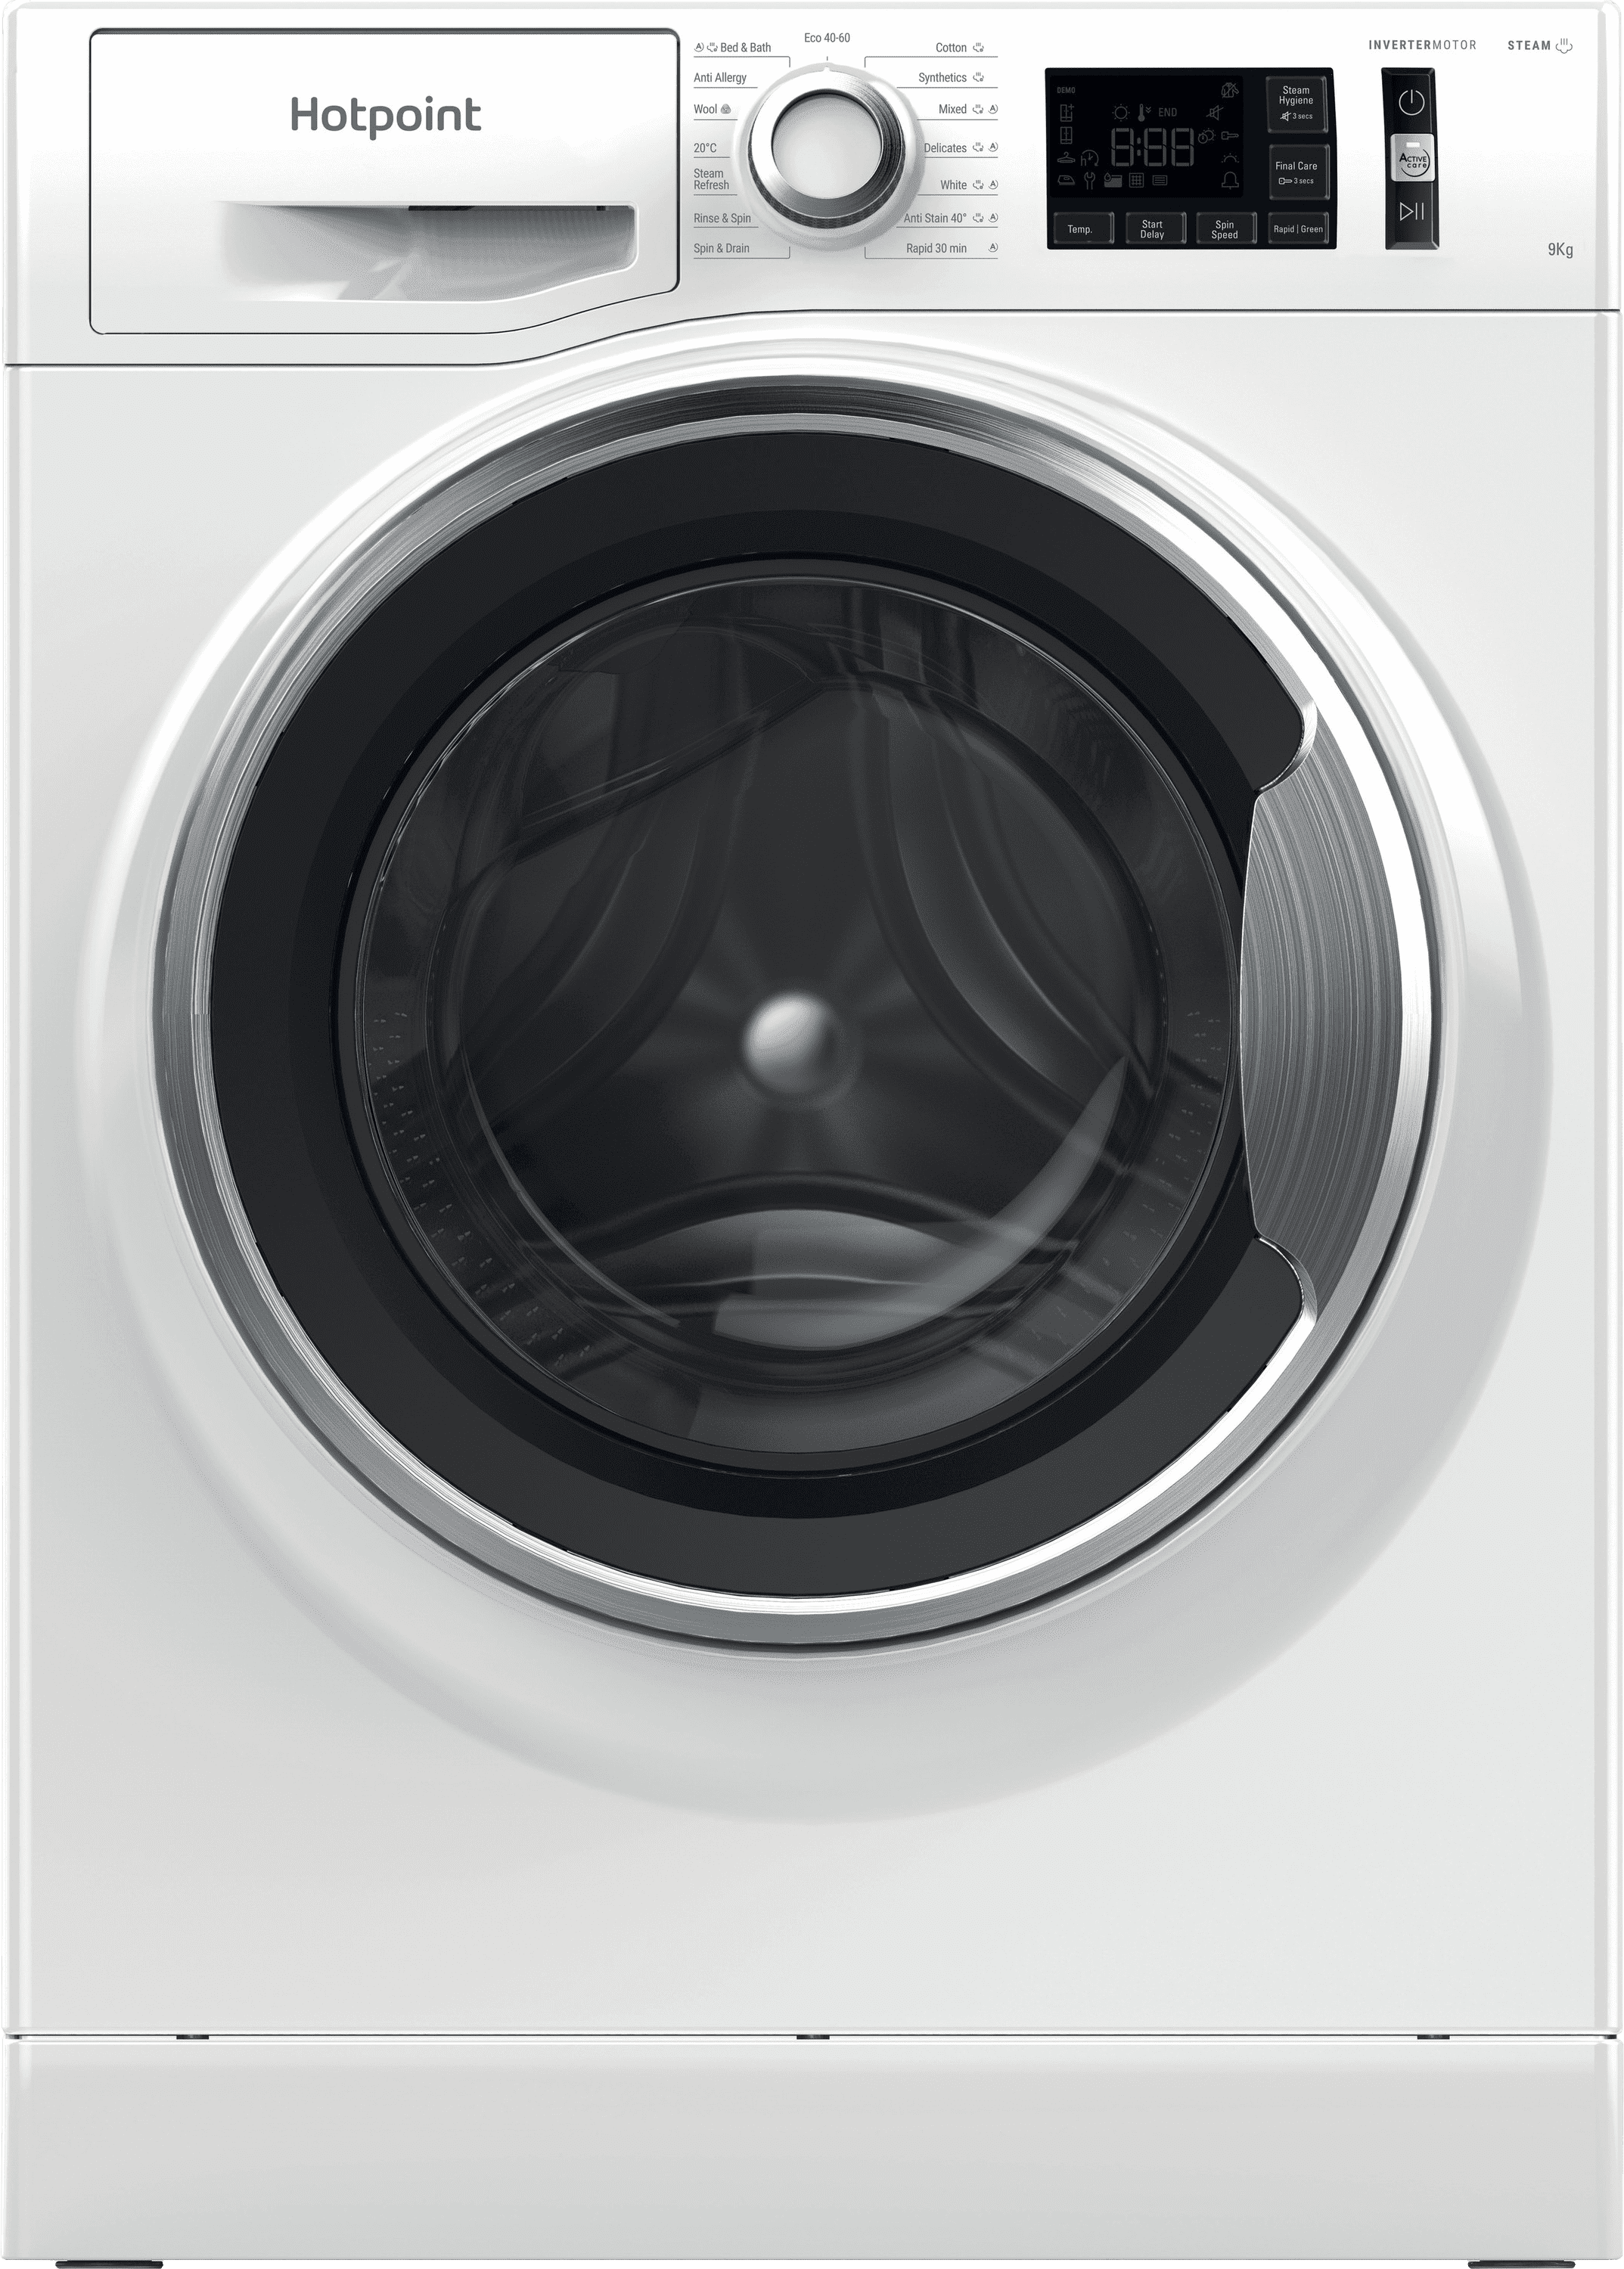 Hotpoint ActiveCare NM11946WCAUKN 9kg Washing Machine with 1400 rpm - White - A Rated White